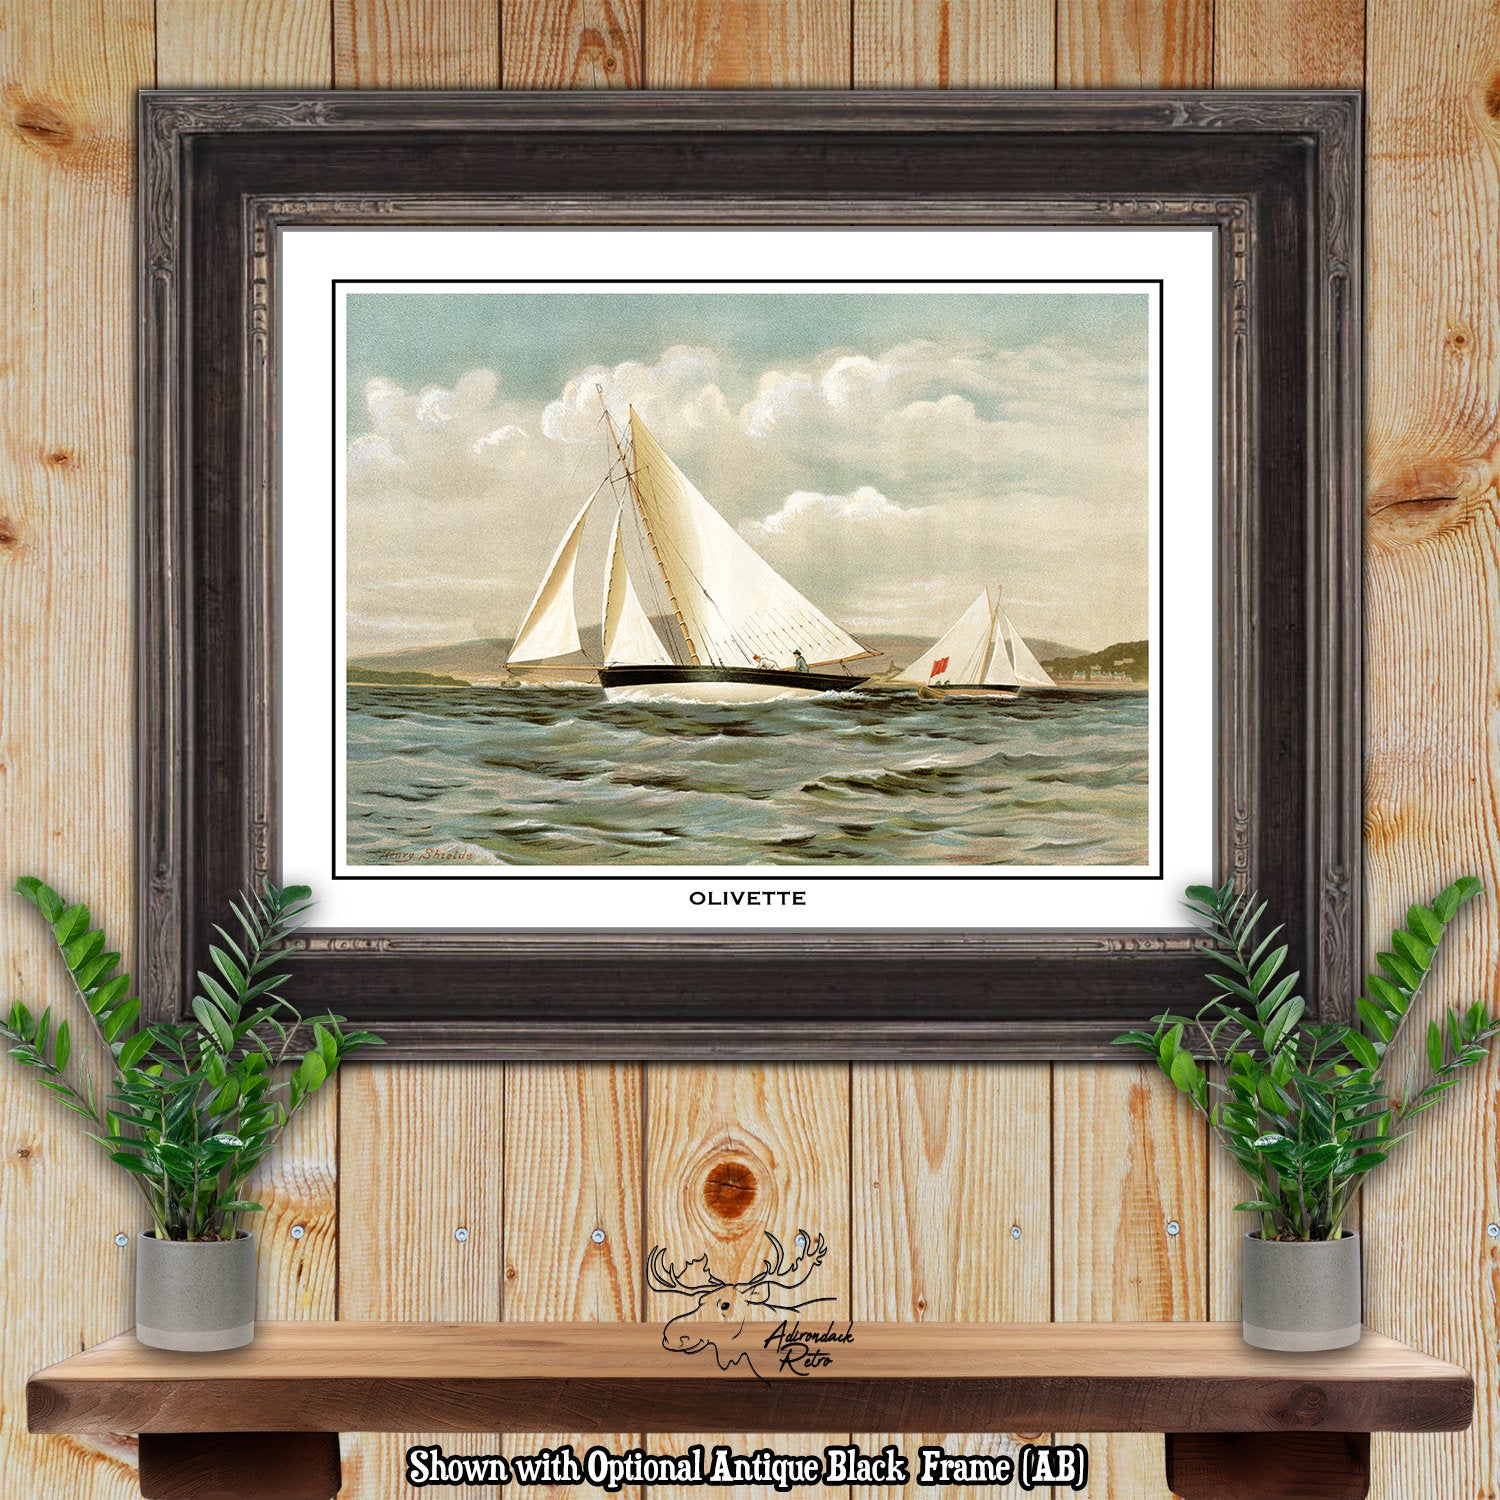 Clyde Yacht Olivette by Henry Shields Giclee Fine Art Print at Adirondack Retro